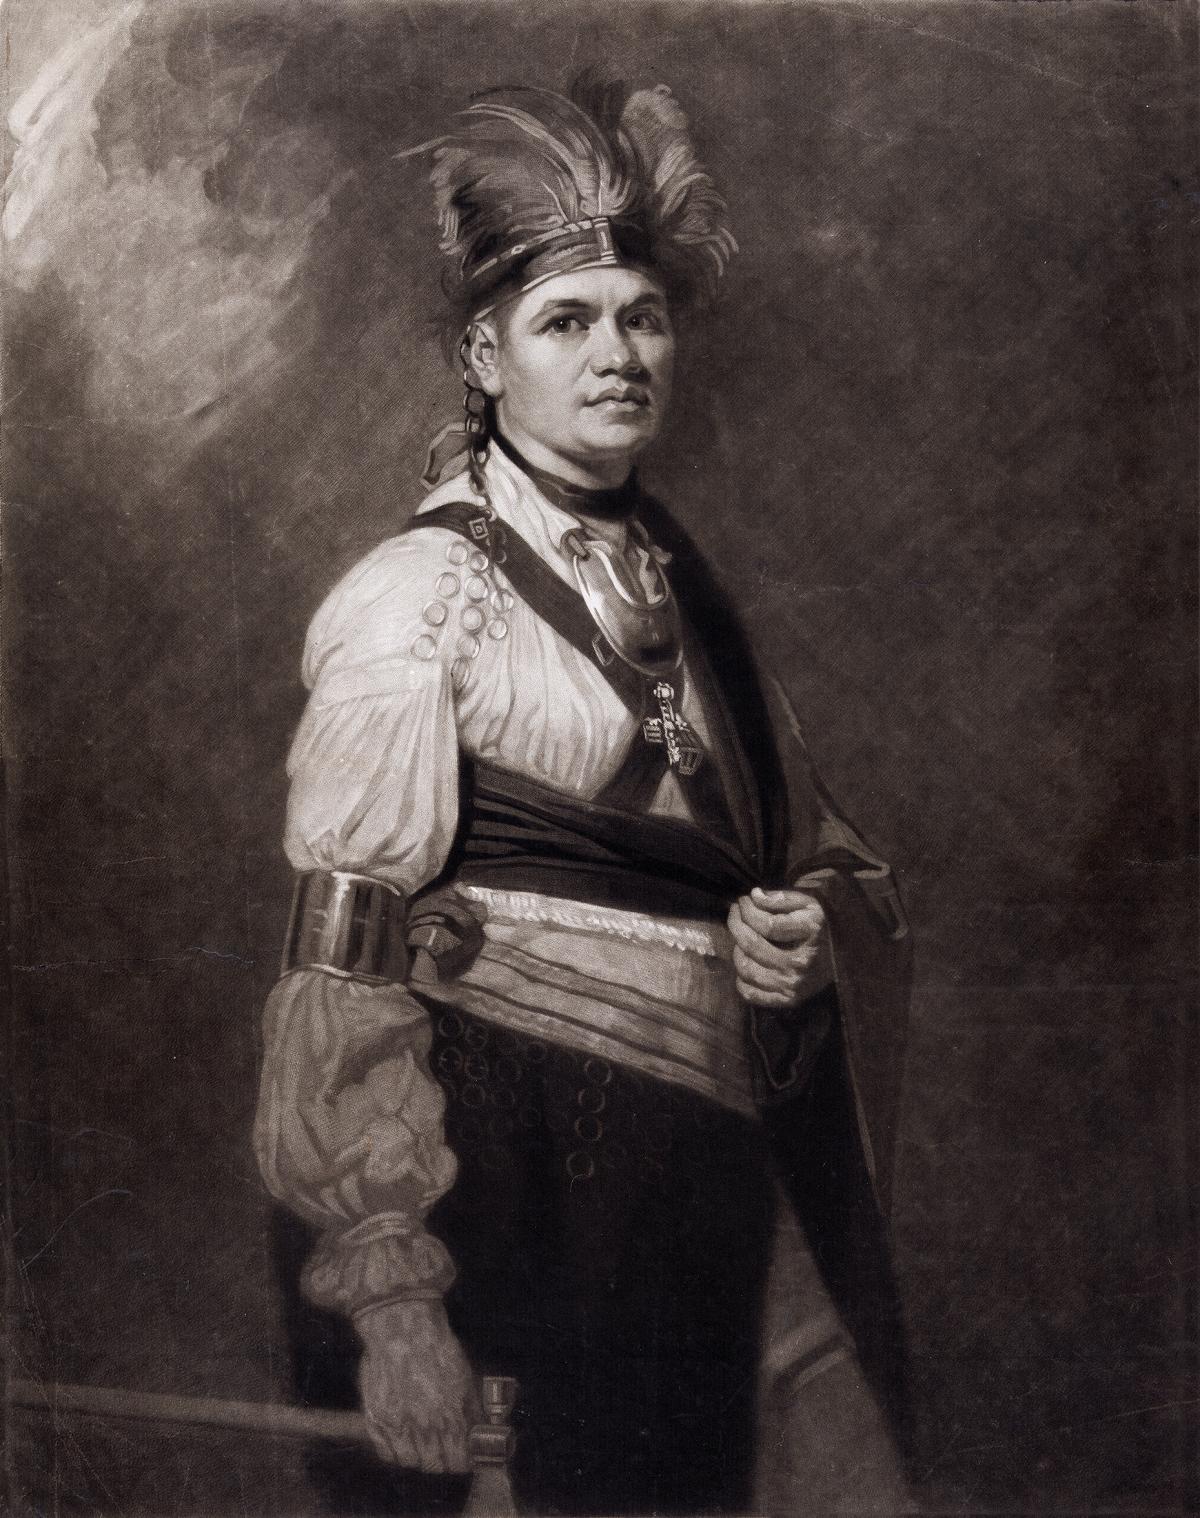 Joseph Brant, wearing a feathered Native American headdress and adornments, but also European-style shirt and trousers